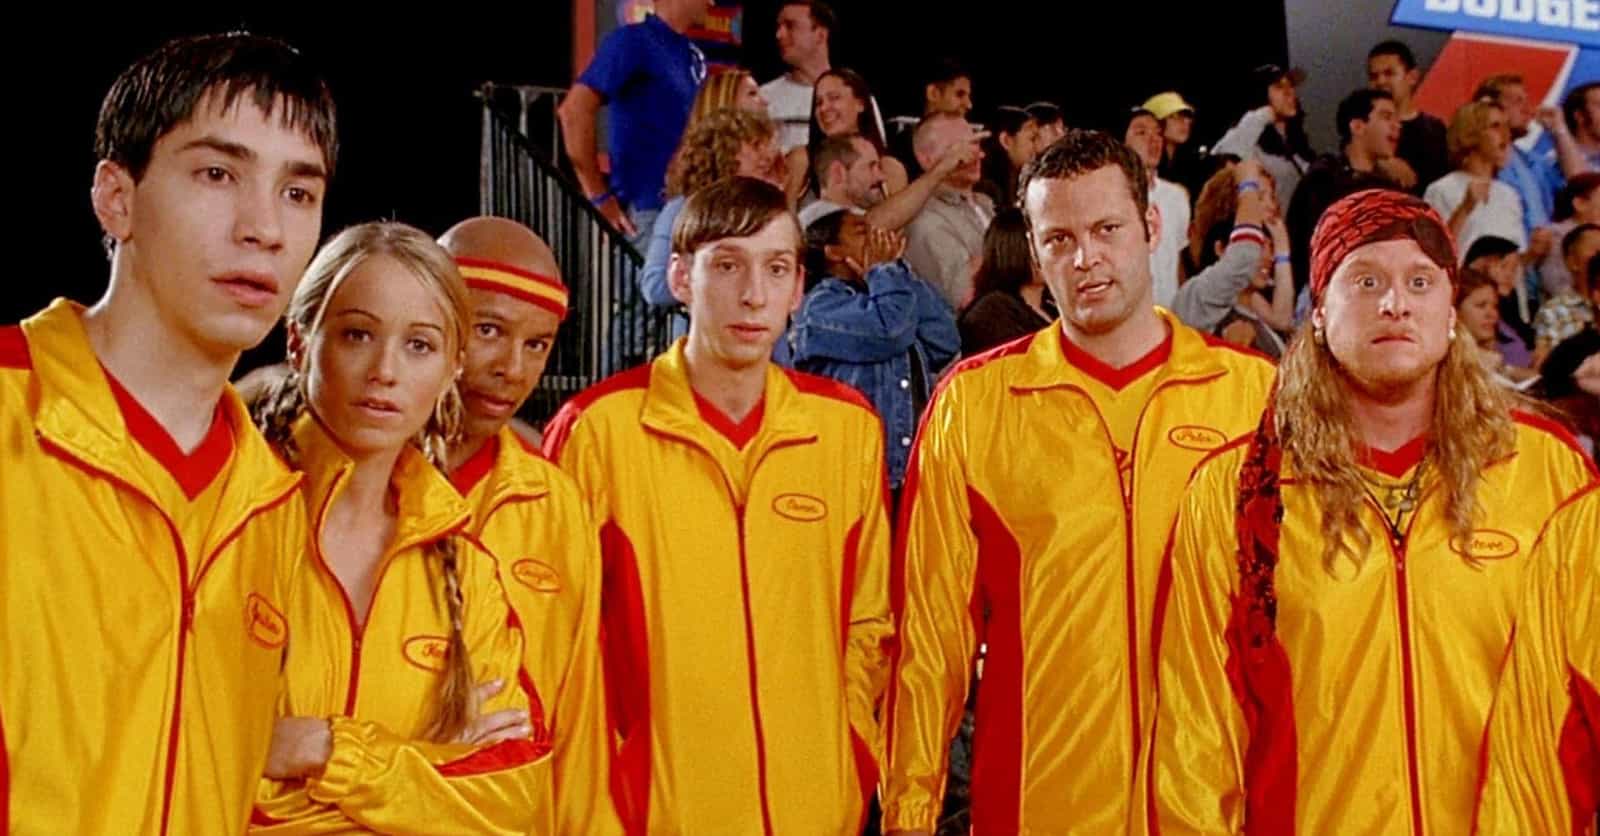 The 30 Best Movies Like 'Dodgeball', Ranked By Fans